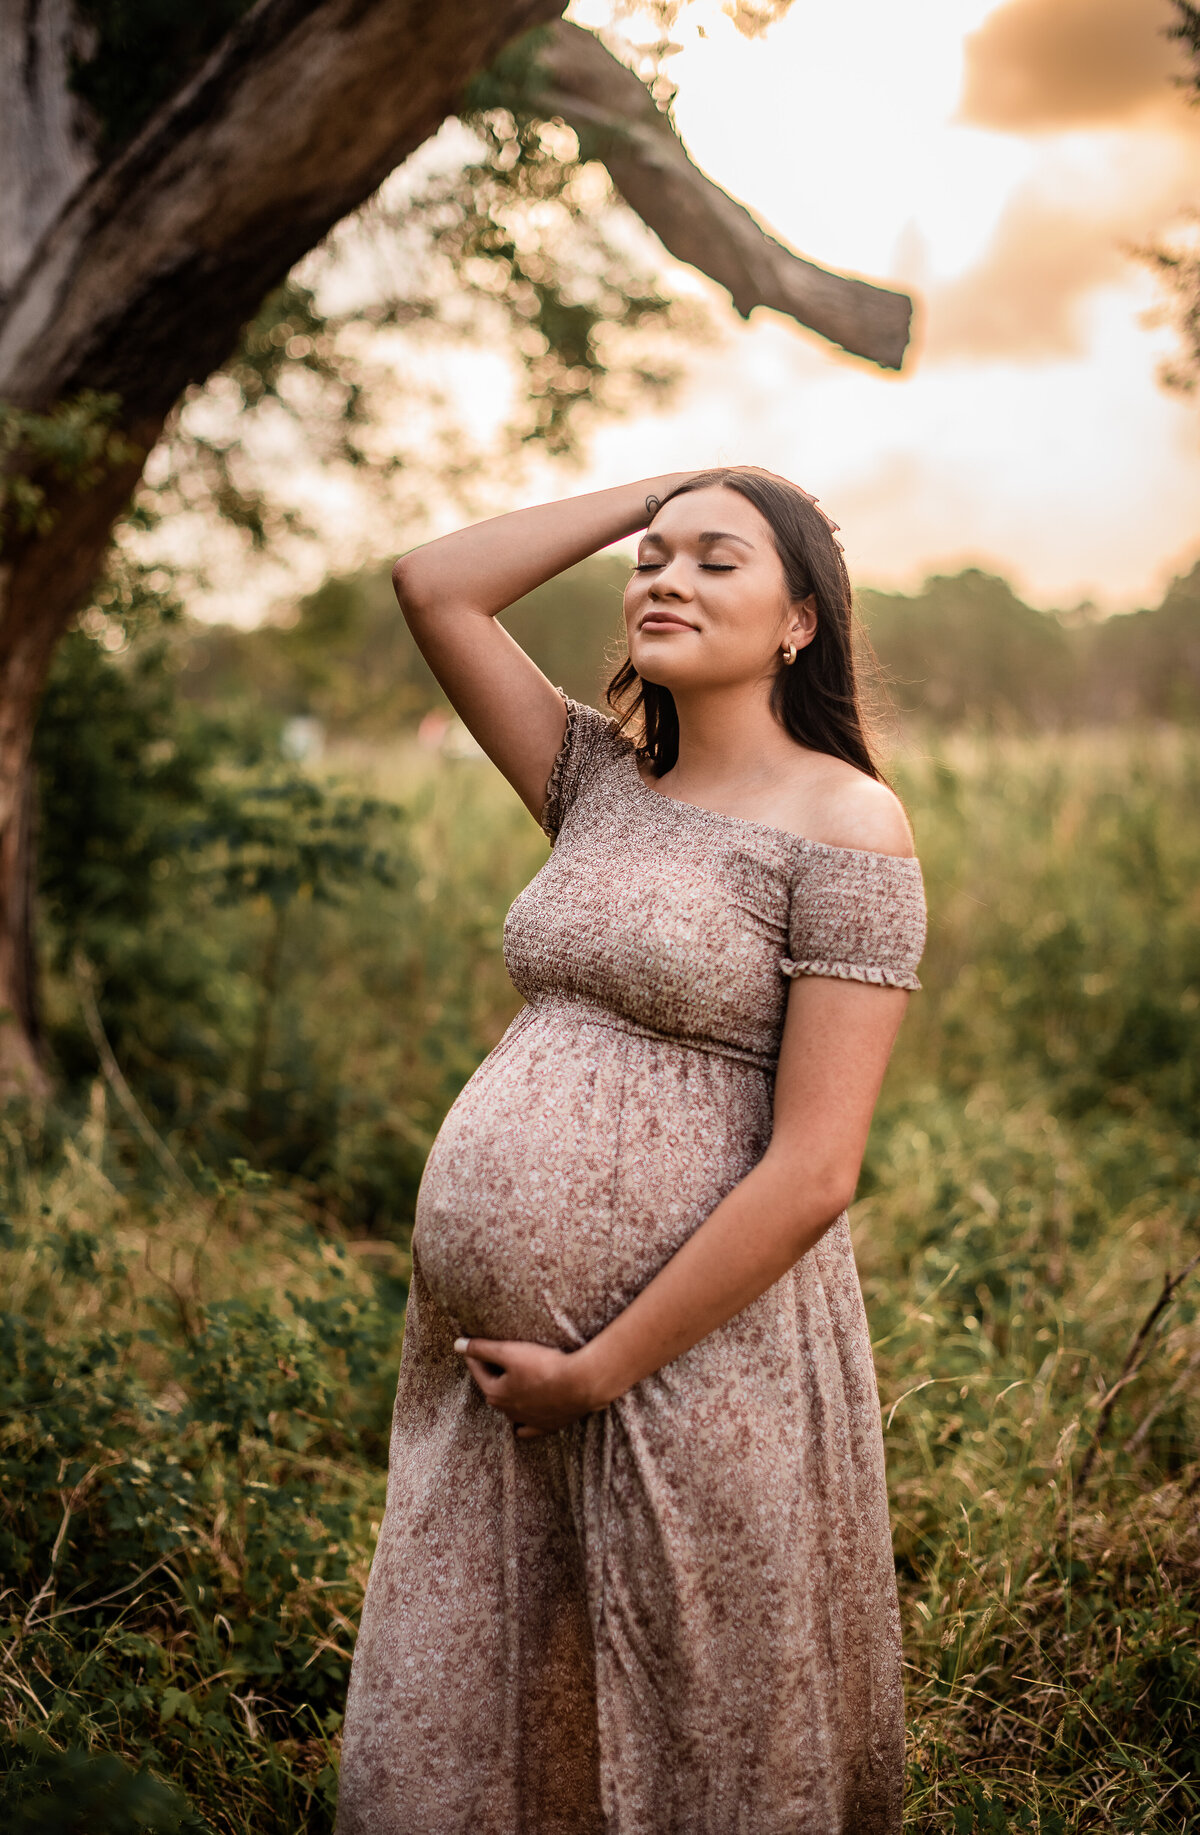 A mother to be leans her head back and basks in the glow of pregnancy at Brazos Bend State Park.